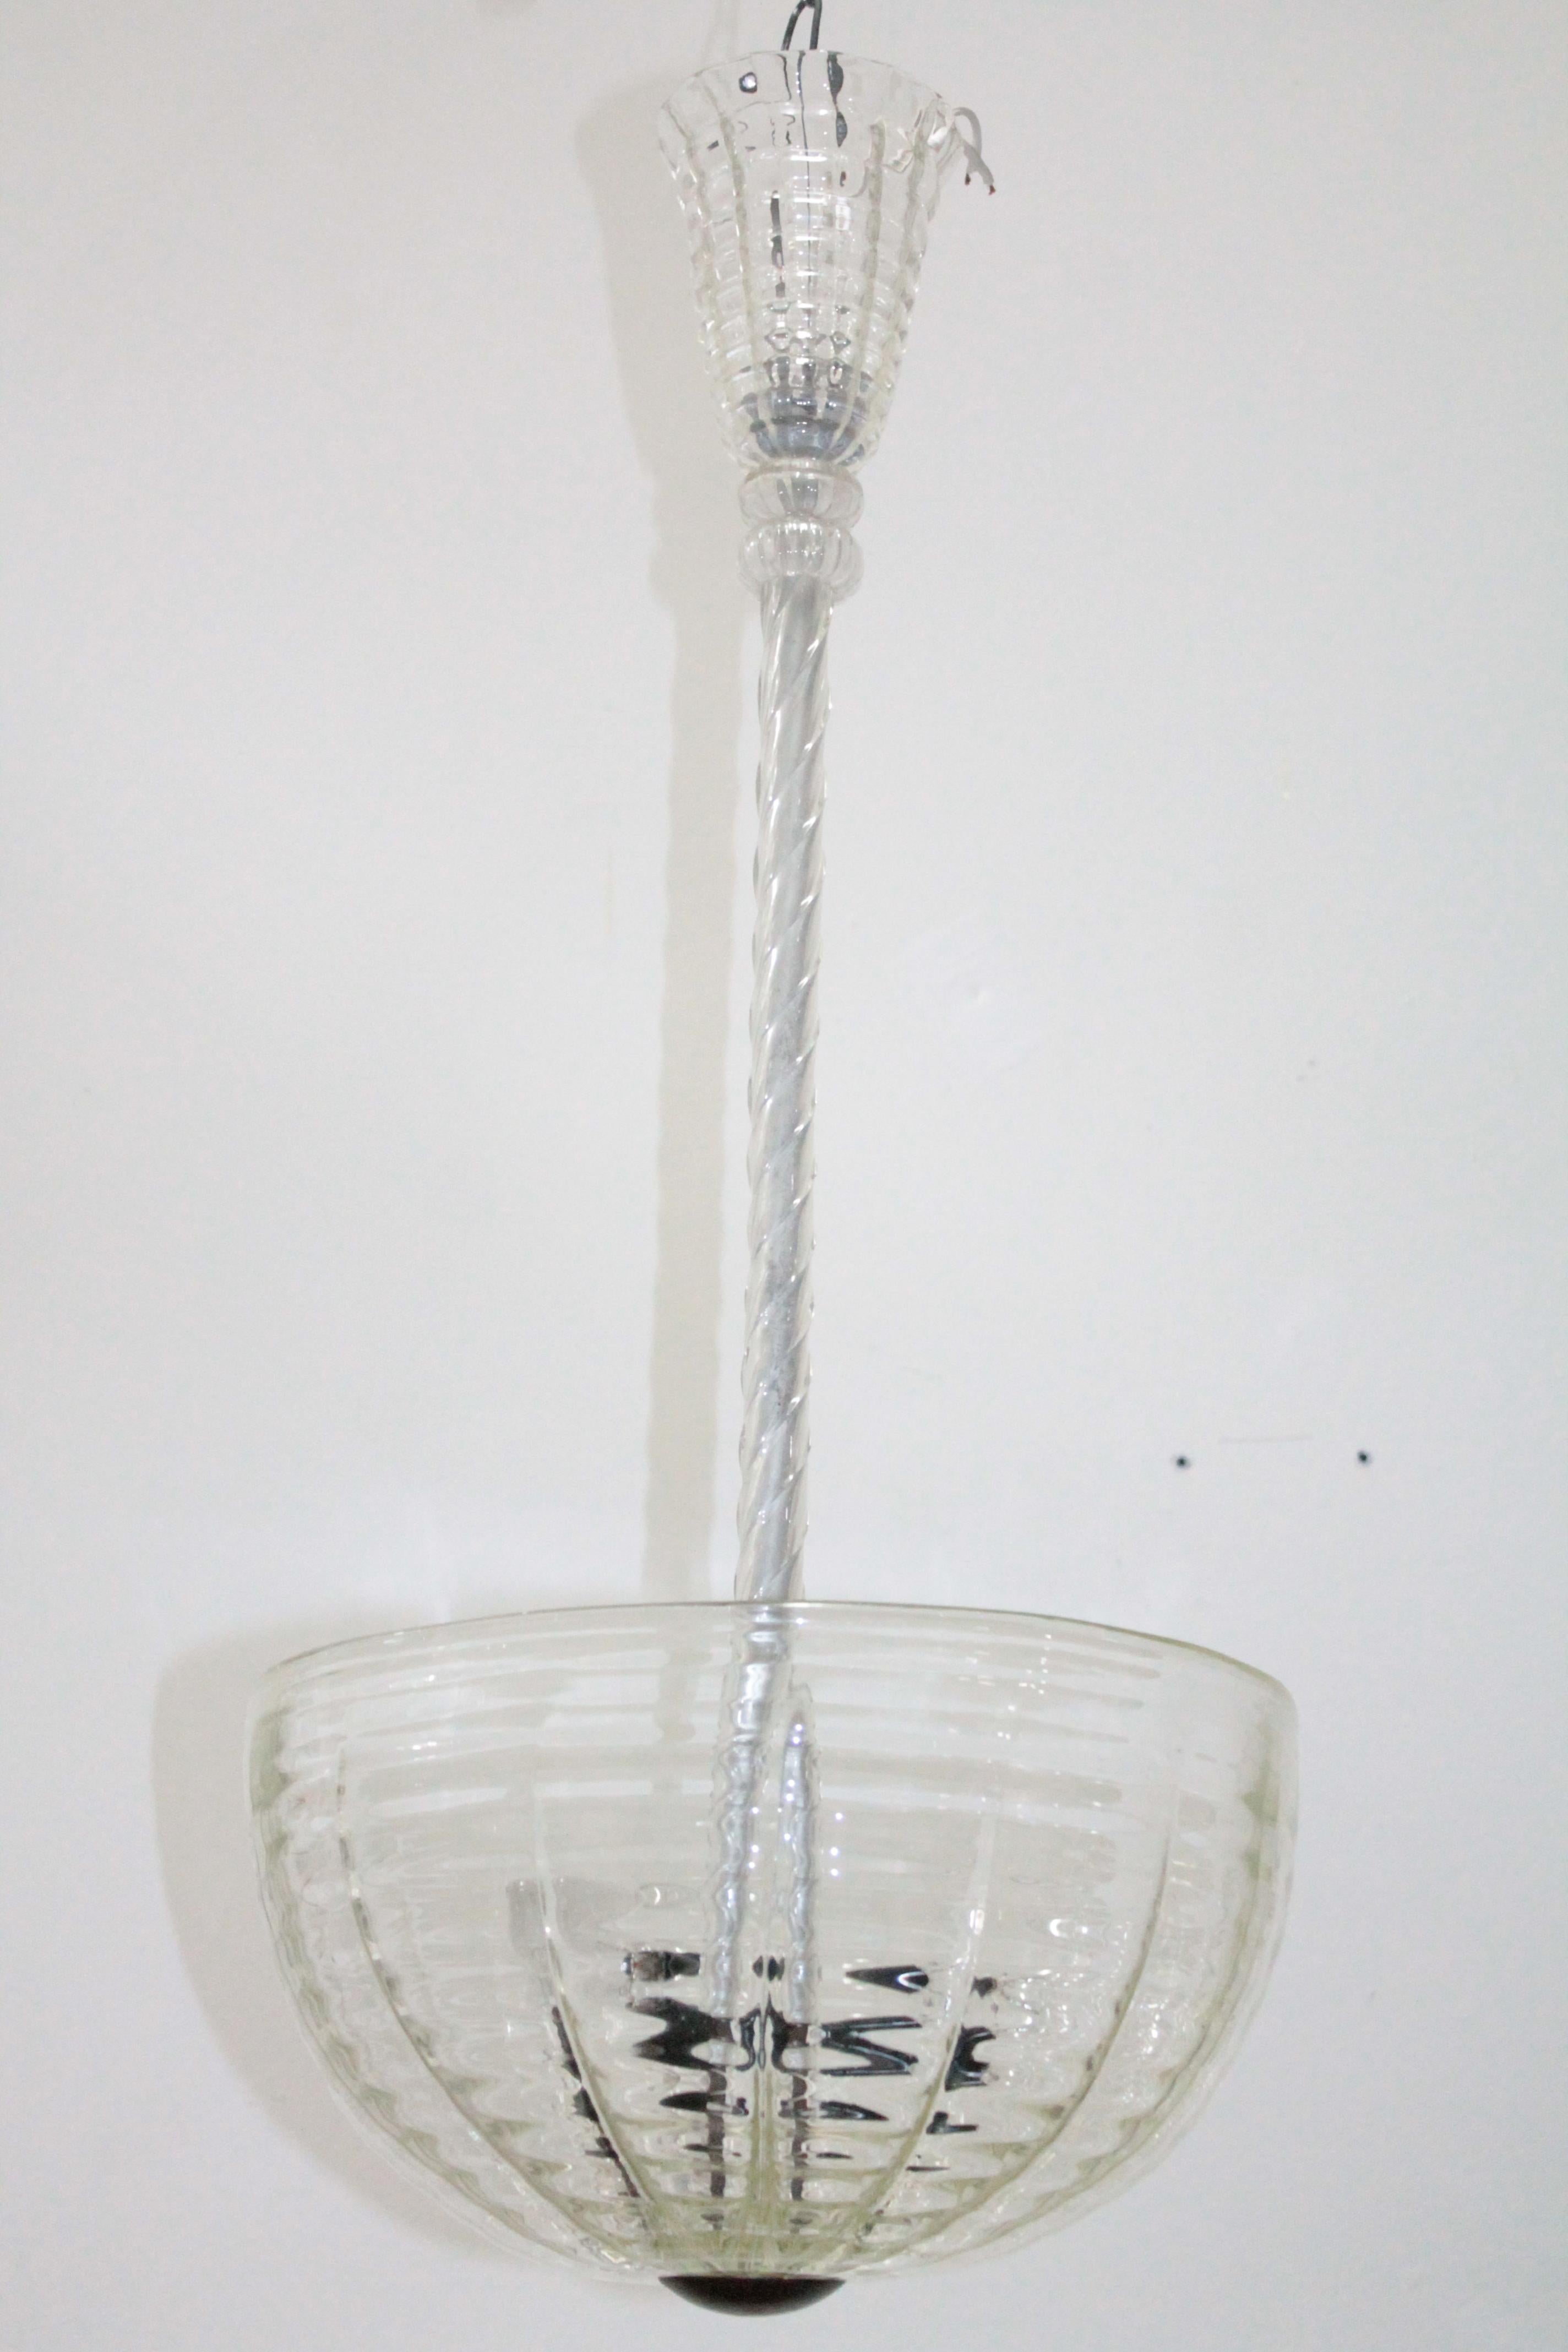 Elegant ceiling lamp by Barovier & Toso, Murano glass made in Italy circa 1950.
Glass in perfect condition.